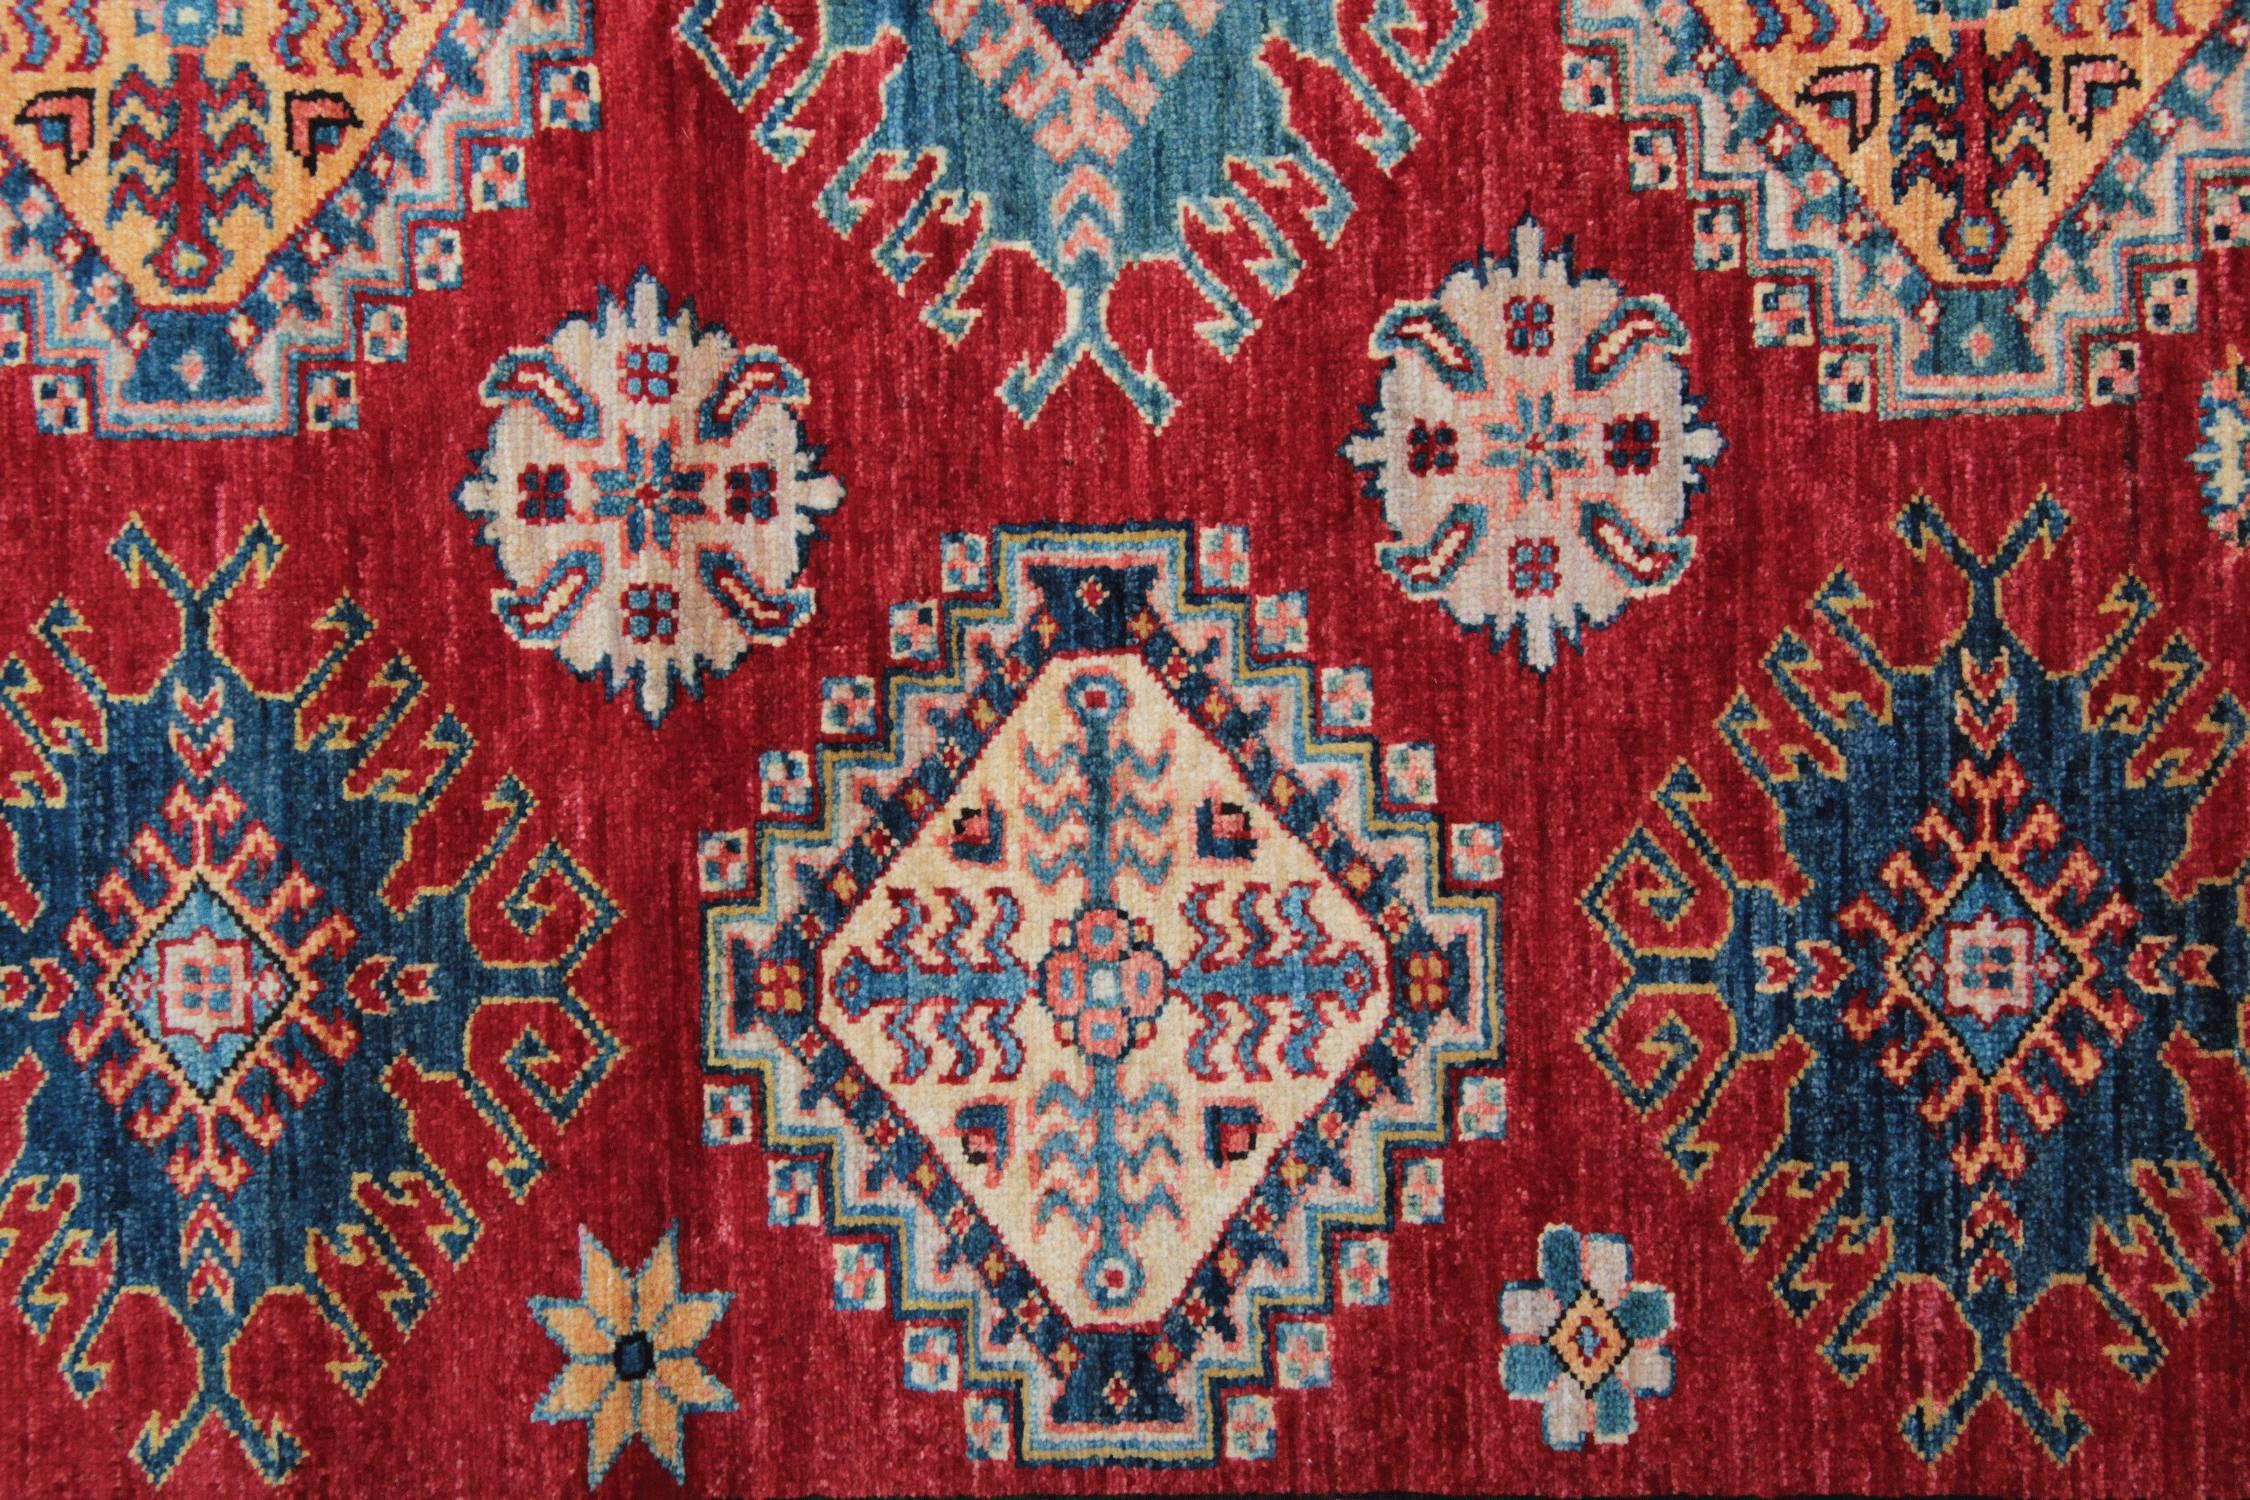 Hand-Crafted Persian Style Rugs, Afghan Rugs, Kazak Rugs, Carpet from Afghanistan